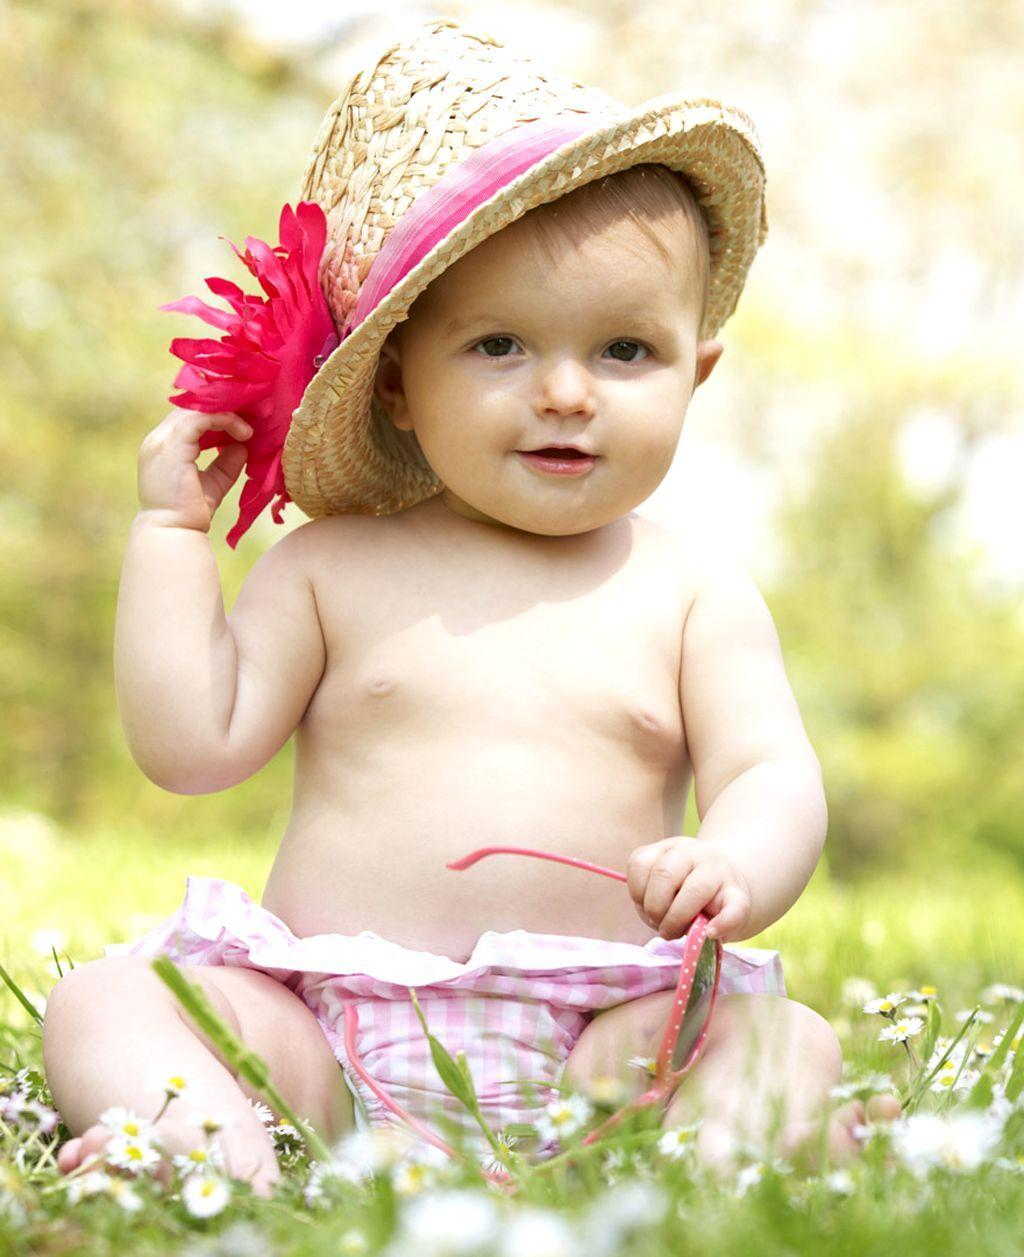 Cute and Lovely Baby Picture Free Download Image Wallpaper. HD